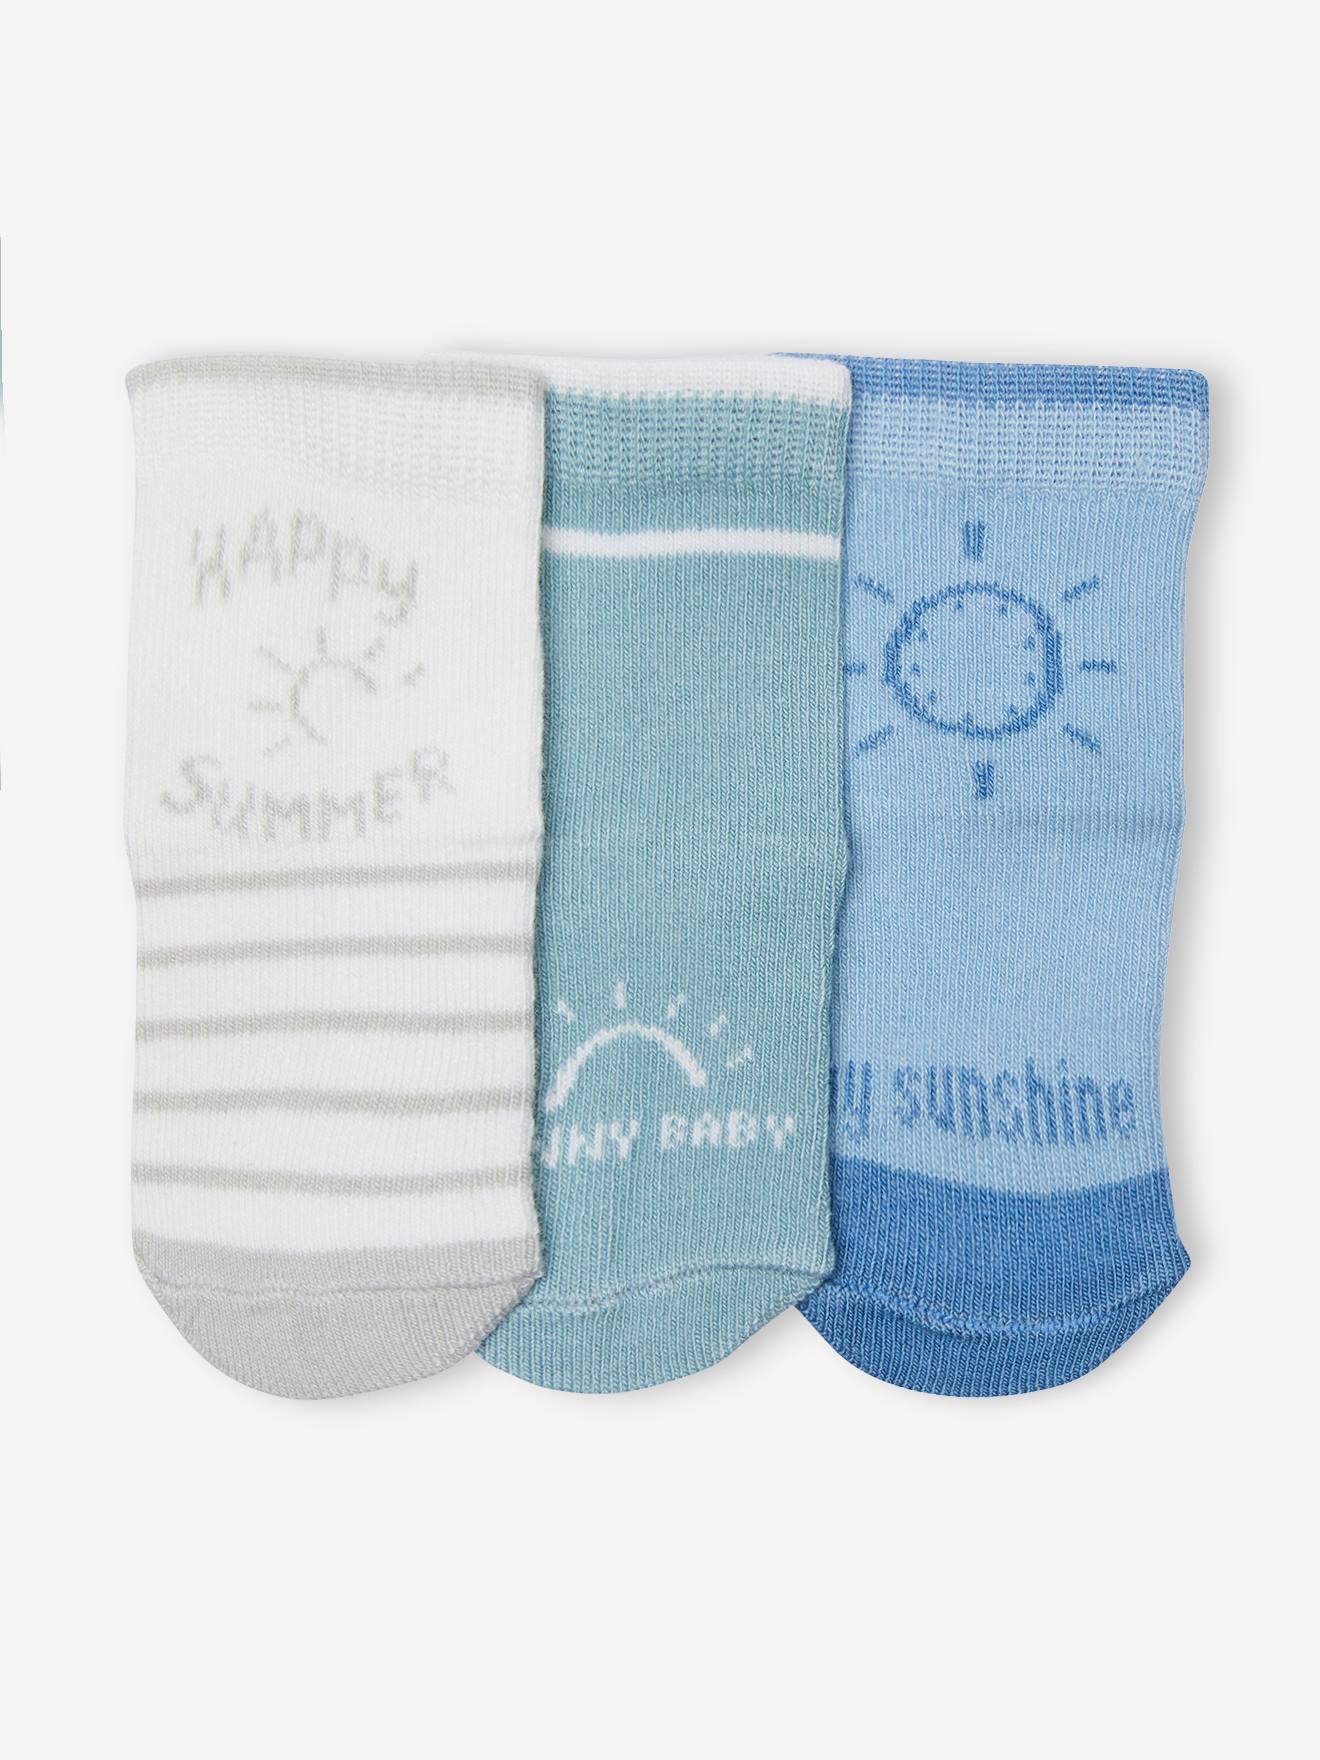 Pack of 3 Pairs of "Sunny" Socks for Babies azure